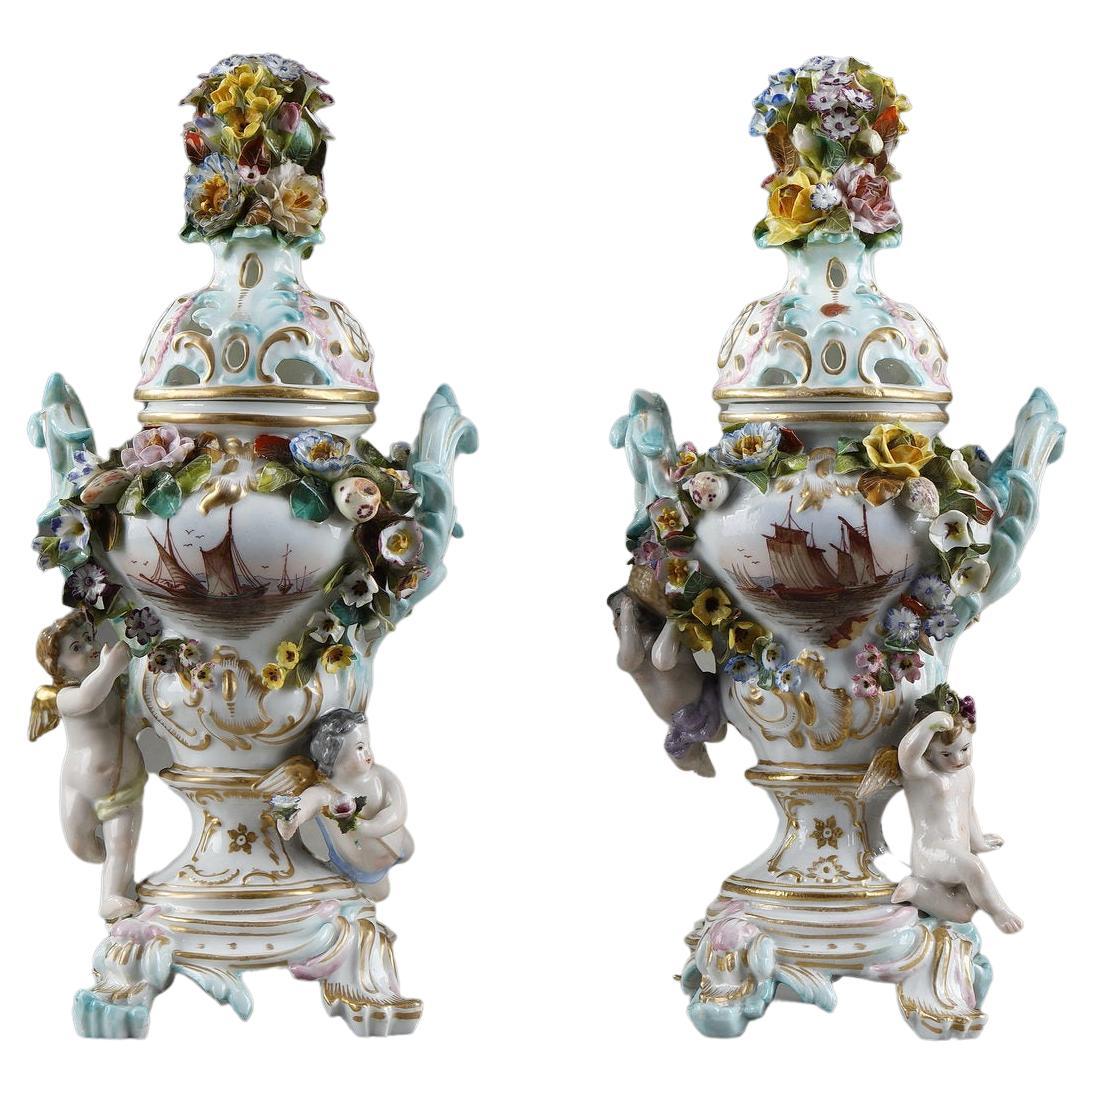 Pair of Polychrome and Gilt Porcelains from the Meissen Manufacture